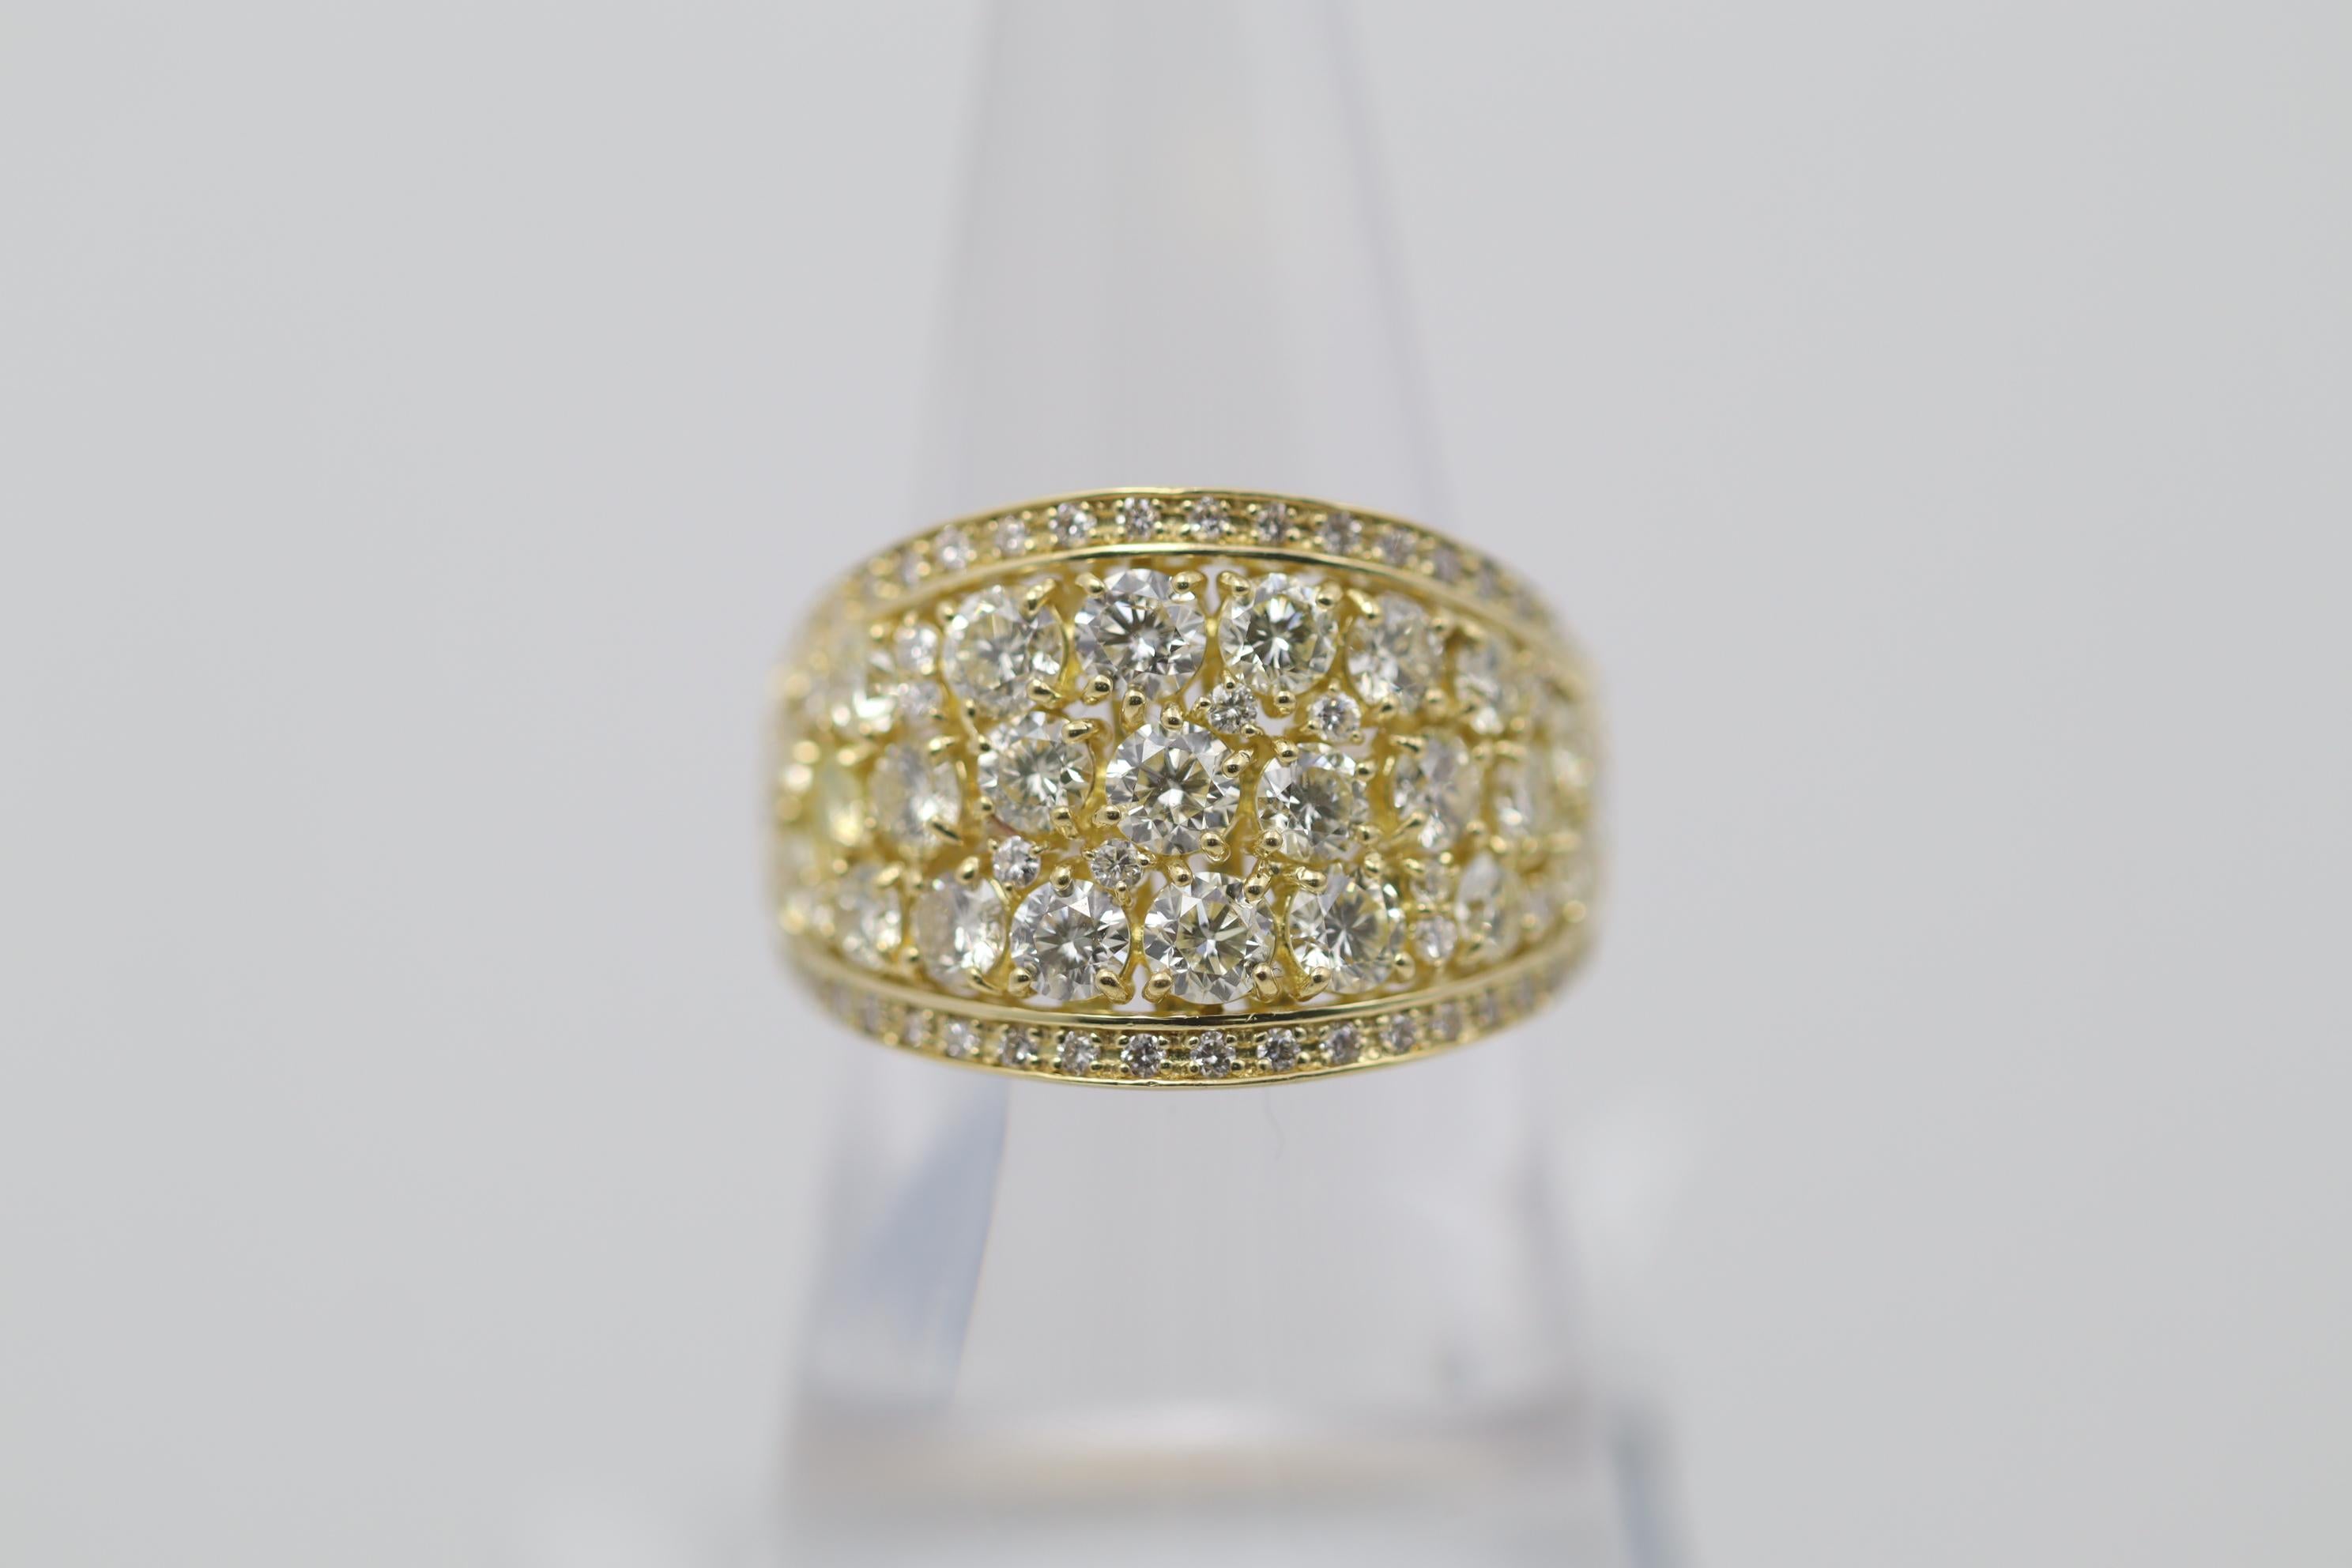 A lovely band ring featuring 3.00 carats of round brilliant-cut diamonds which are cluster set in the center of the ring. Two rows of smaller diamonds are set above and below the cluster for a clean looking finish. Made in 18k yellow gold and ready